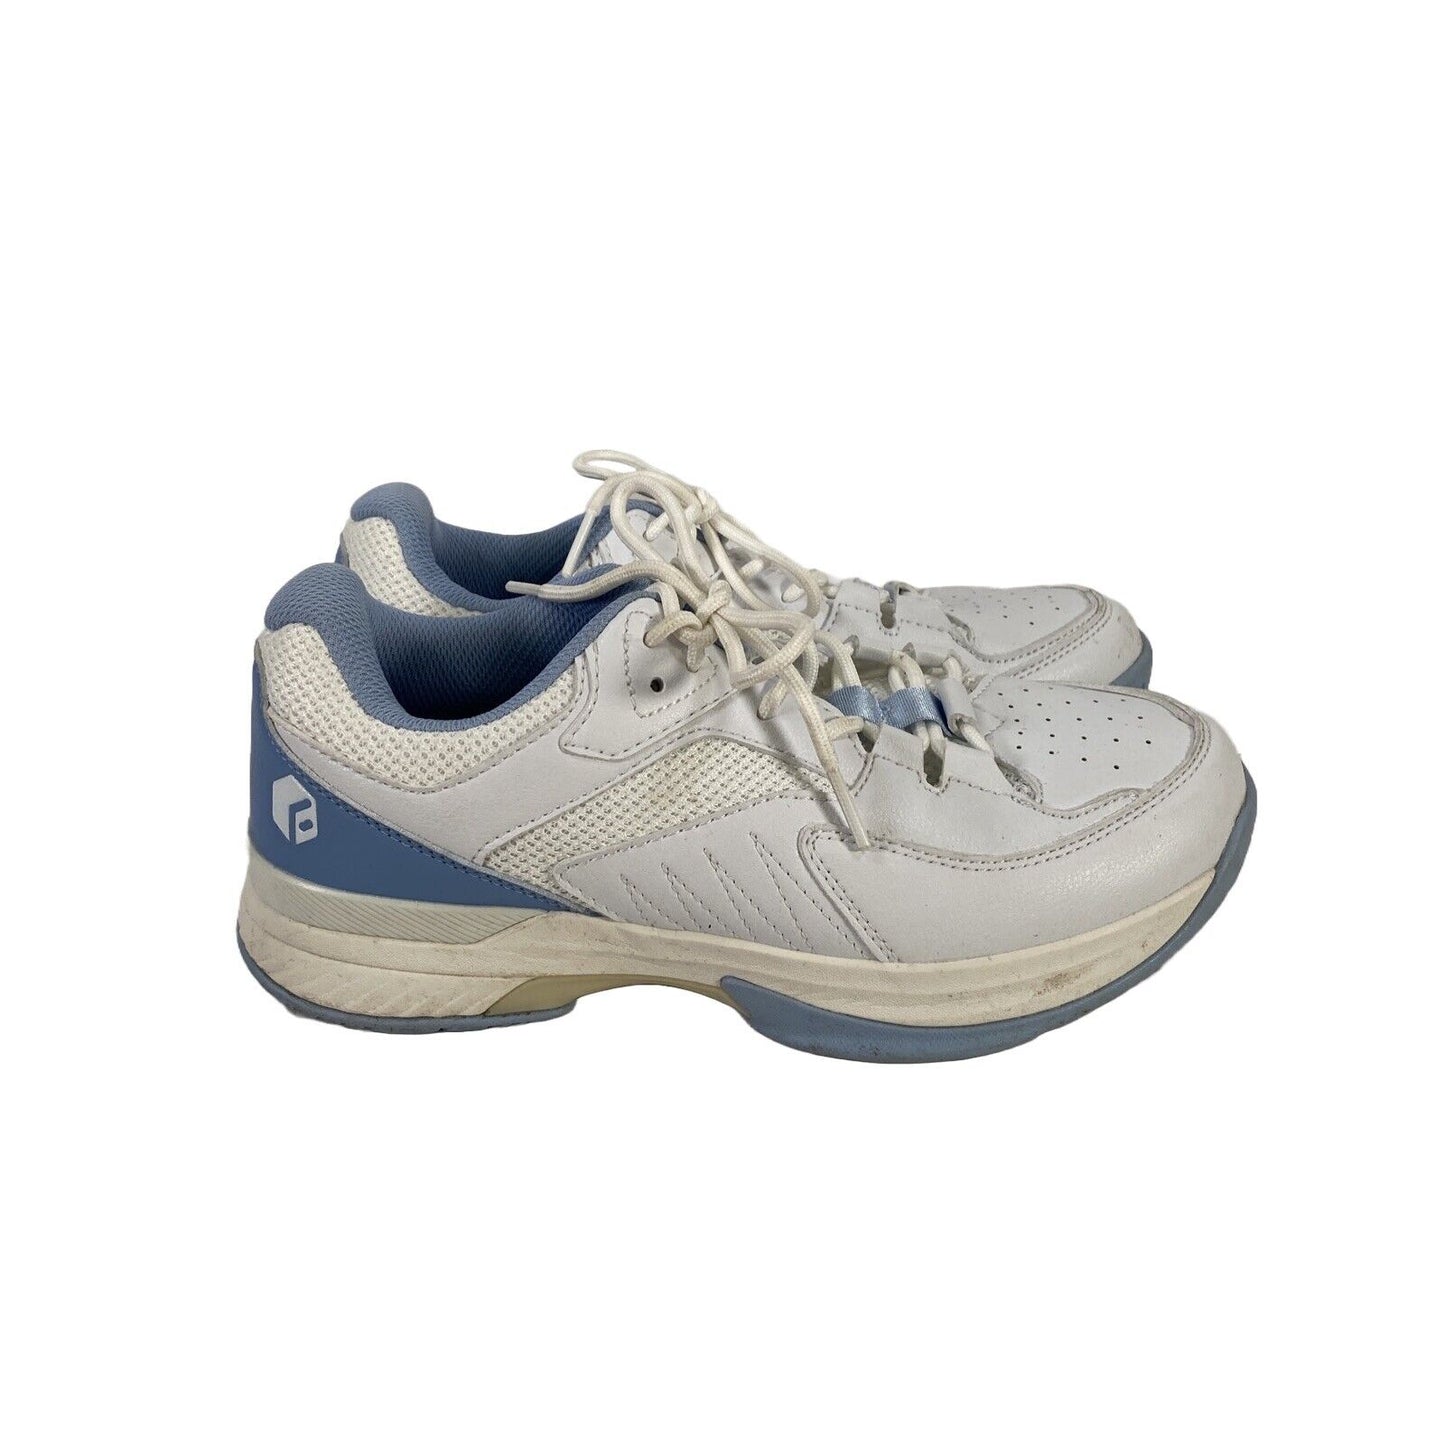 FitVille Women's White/Blue Lace Up Comfort Walking Shoes - 8 Wide